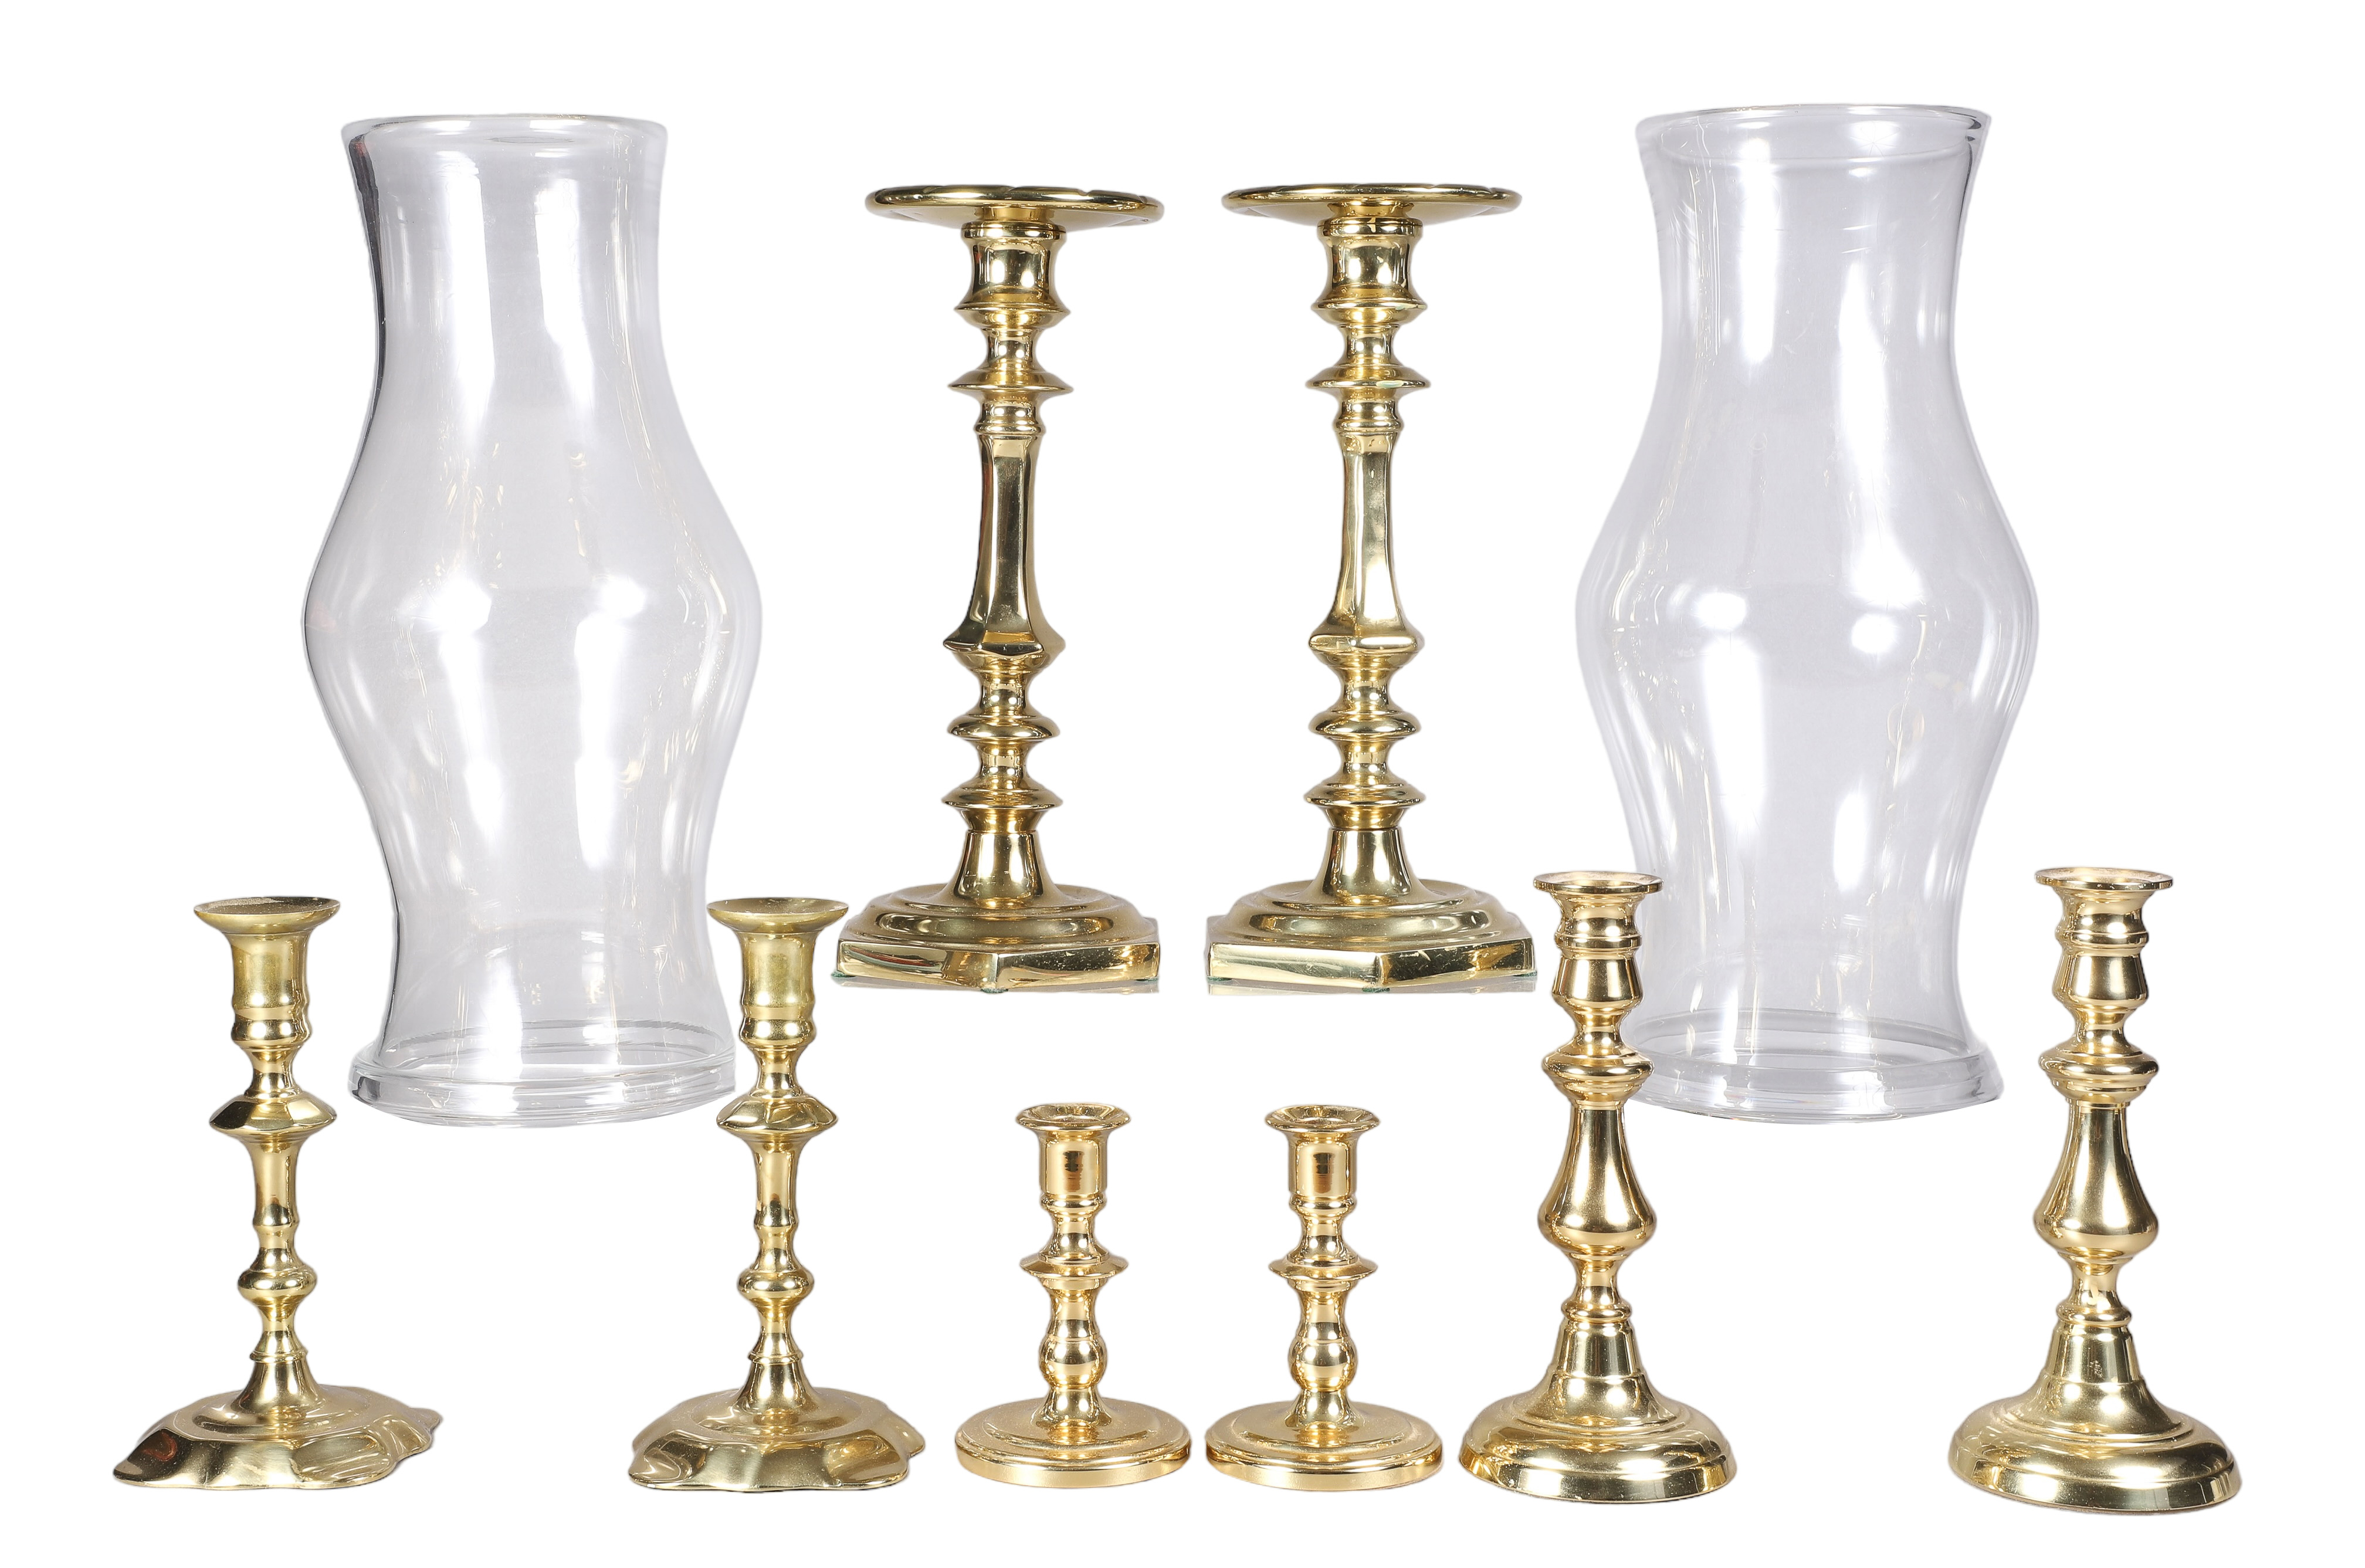  8 Pairs of Brass Candlestick 2e1ef2